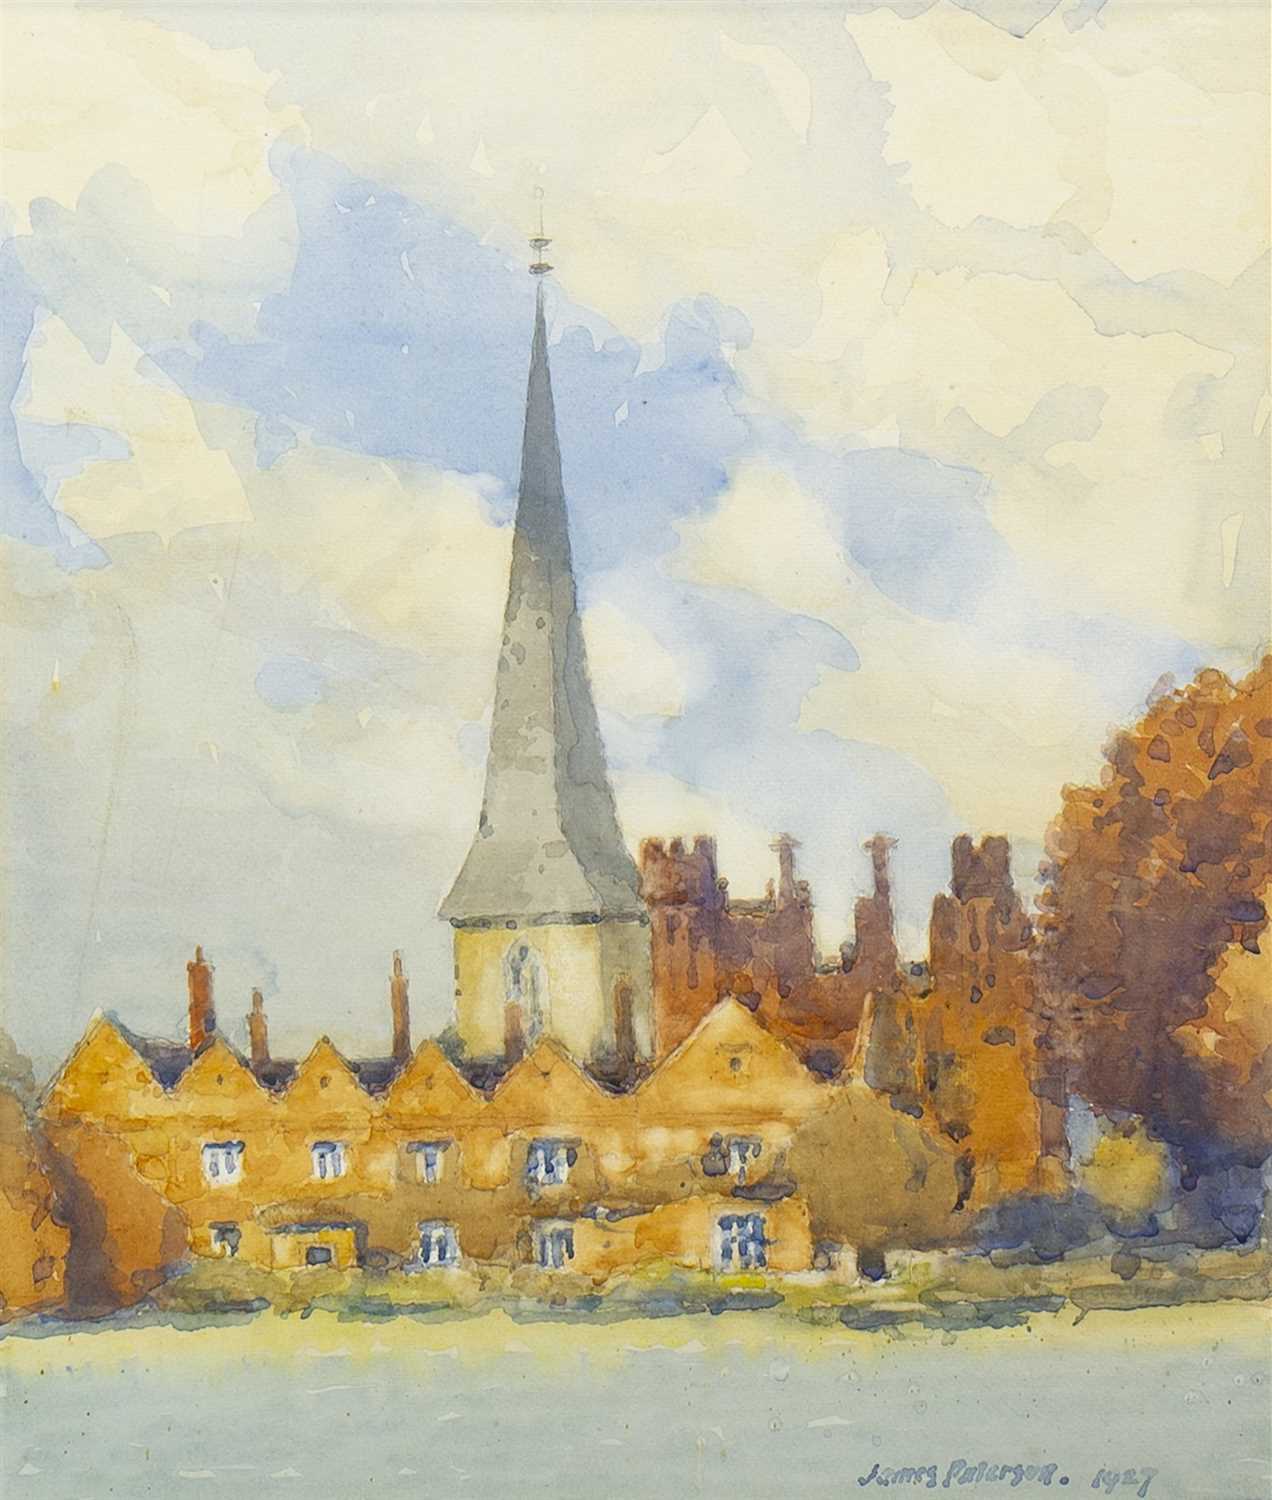 Lot 522 - THE OLD CHURCH SPIRE, A WATERCOLOUR BY JAMES PATERSON